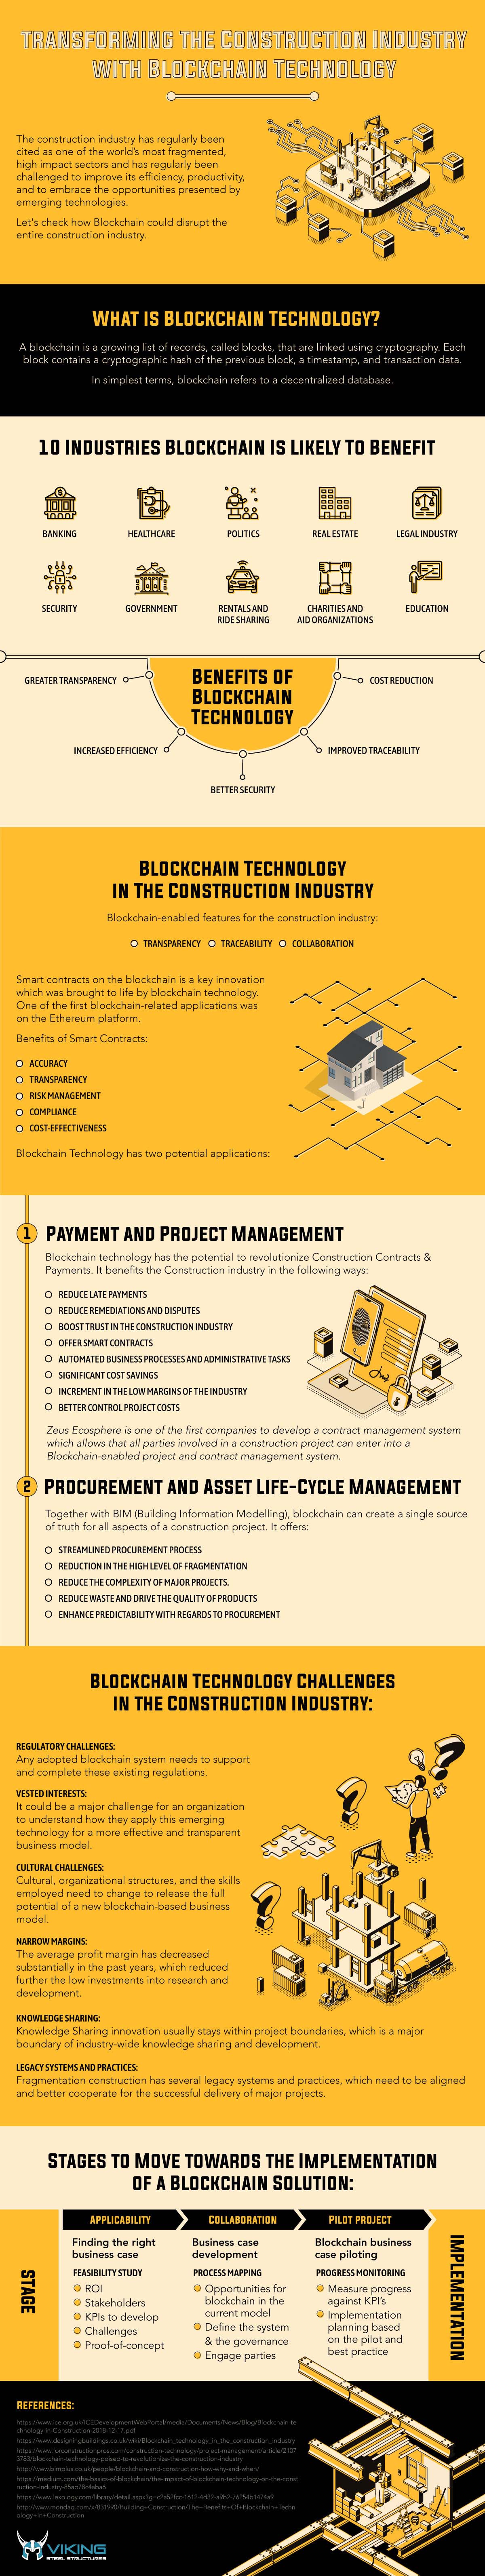 Transforming the Construction Industry with Blockchain Technology